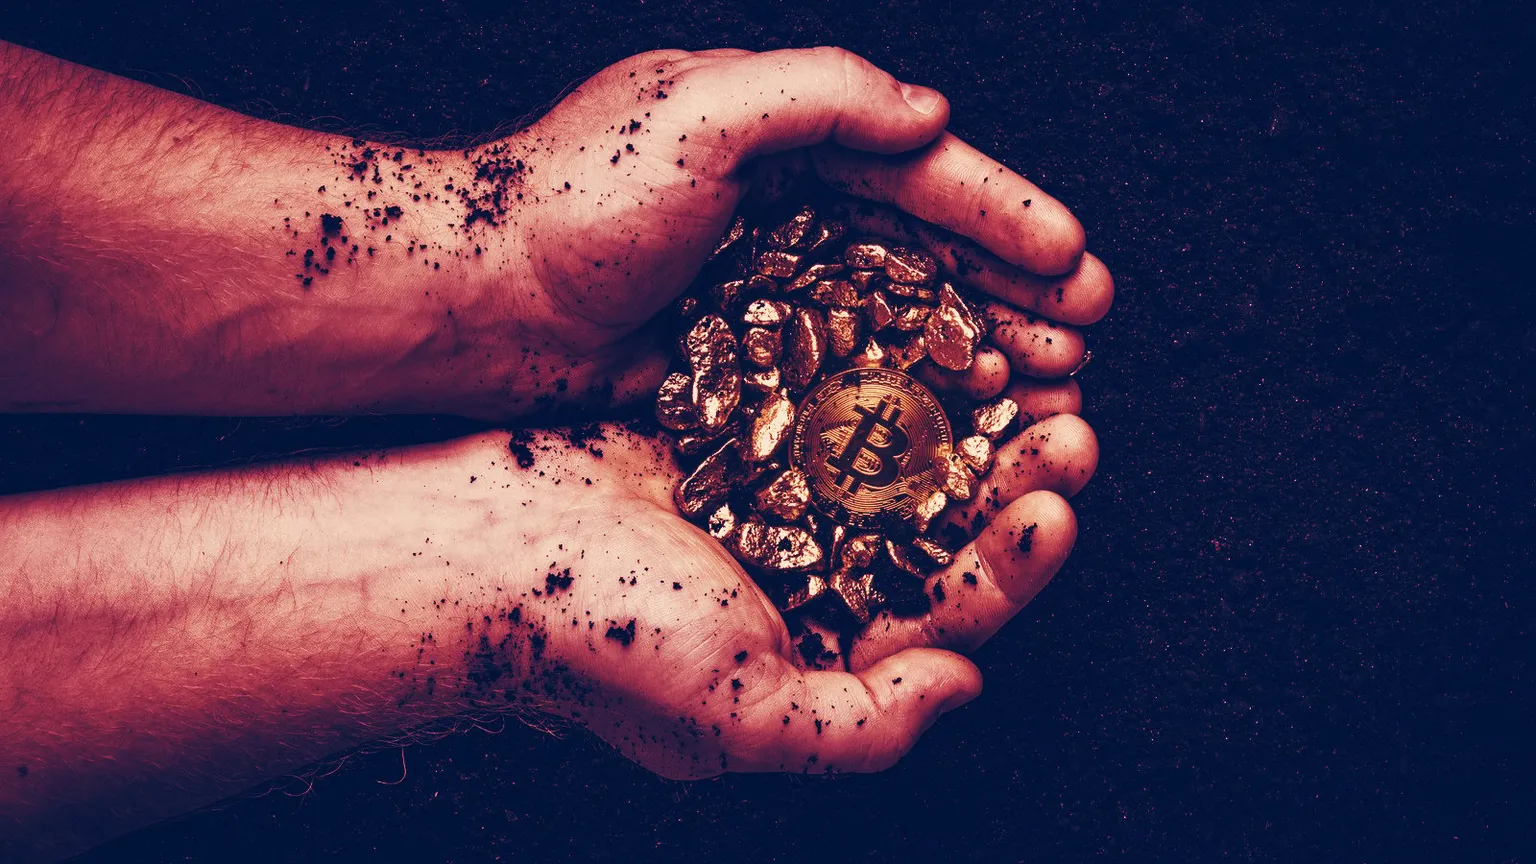 Bitcoin amid gold nuggets. Image: Shutterstock